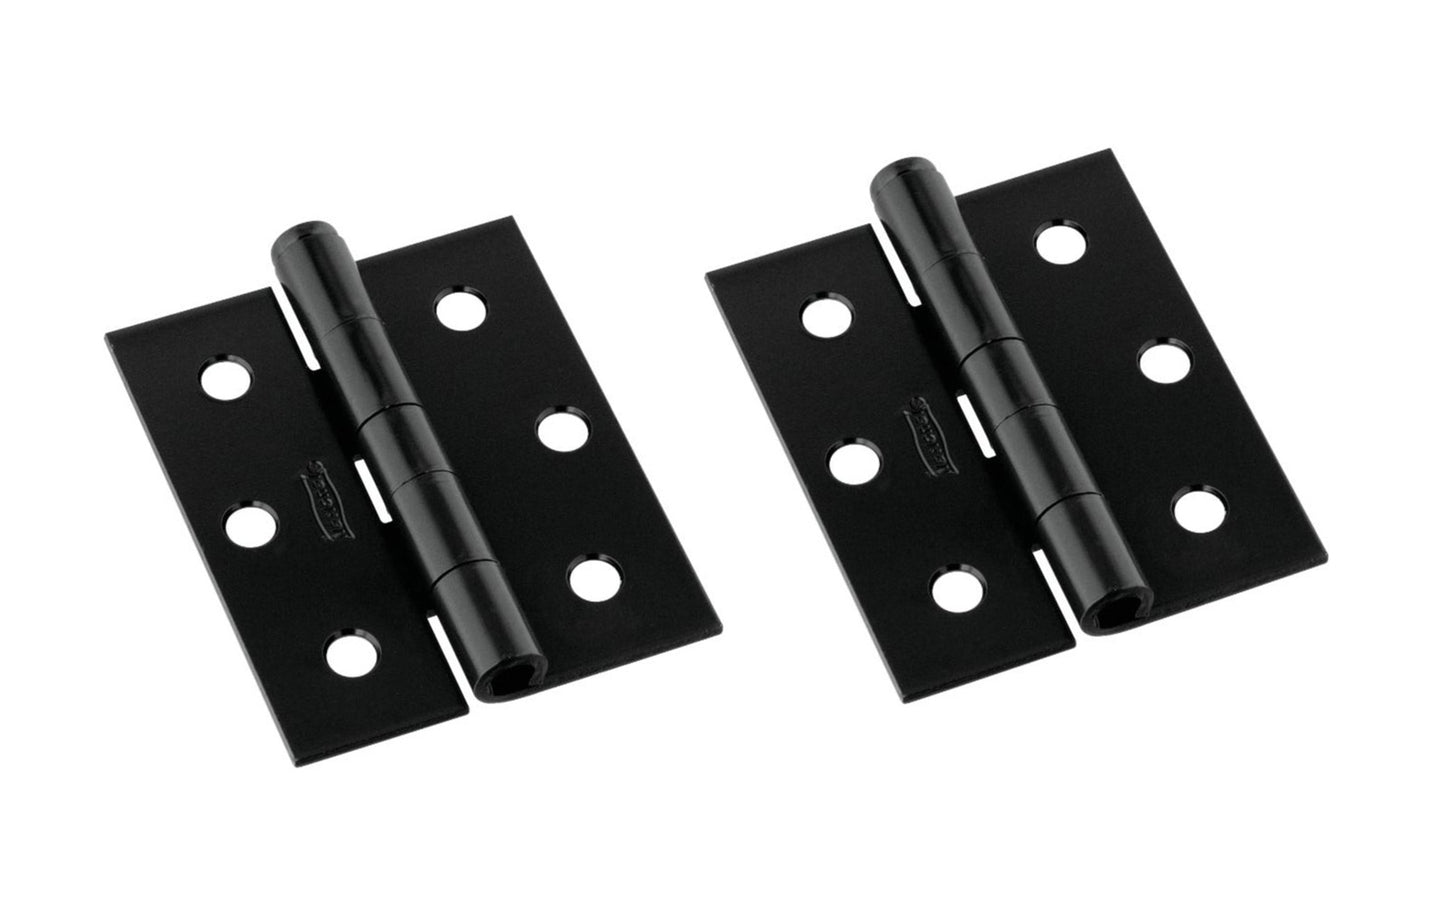 3" Black Finish Screen / Storm Door Hinges sold in a 2 pack. Button tip, loose pin, un-swaged, reversible hinge. Use full-surface, half-surface, half-mortise or for offset where door & jamb are not flush. Screw holes countersunk on both sides of each leaf. Size: 3" x 2-1/2". Includes flat head screws. National Hardware Model No. N115-451.